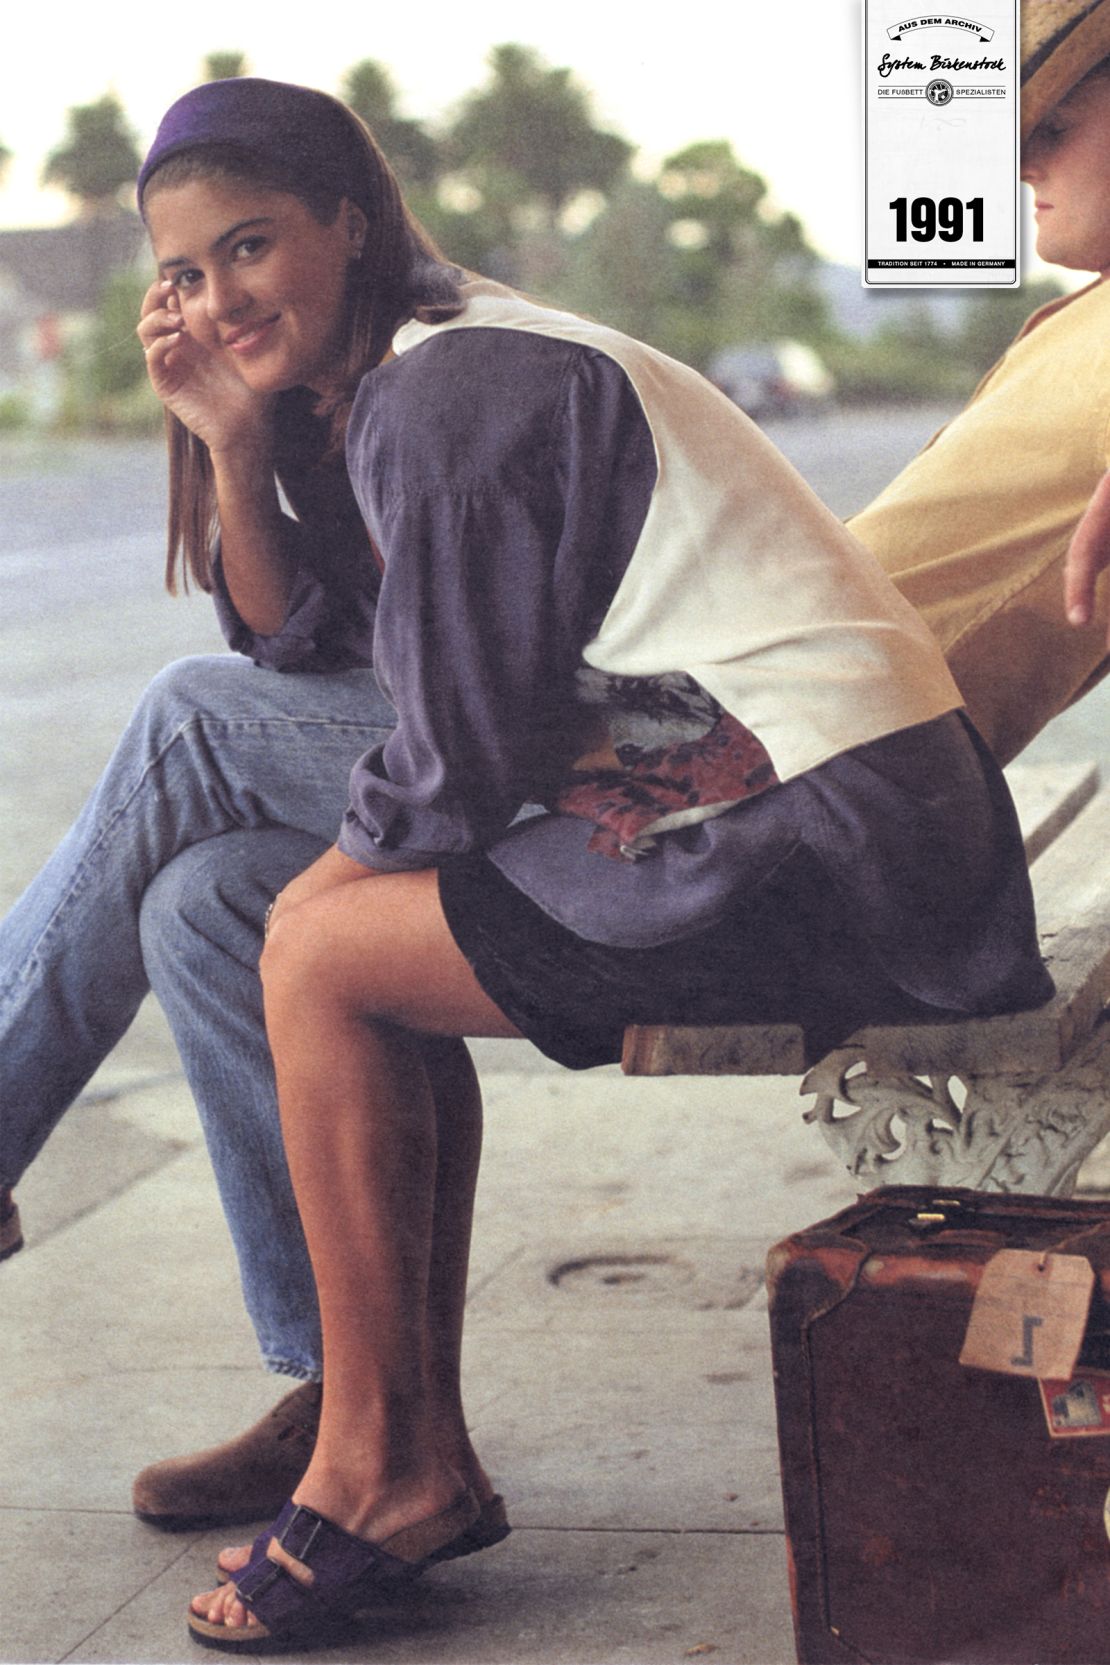 A model wears the classic two-strap Arizona sandal for a Birkenstock poster, 1991